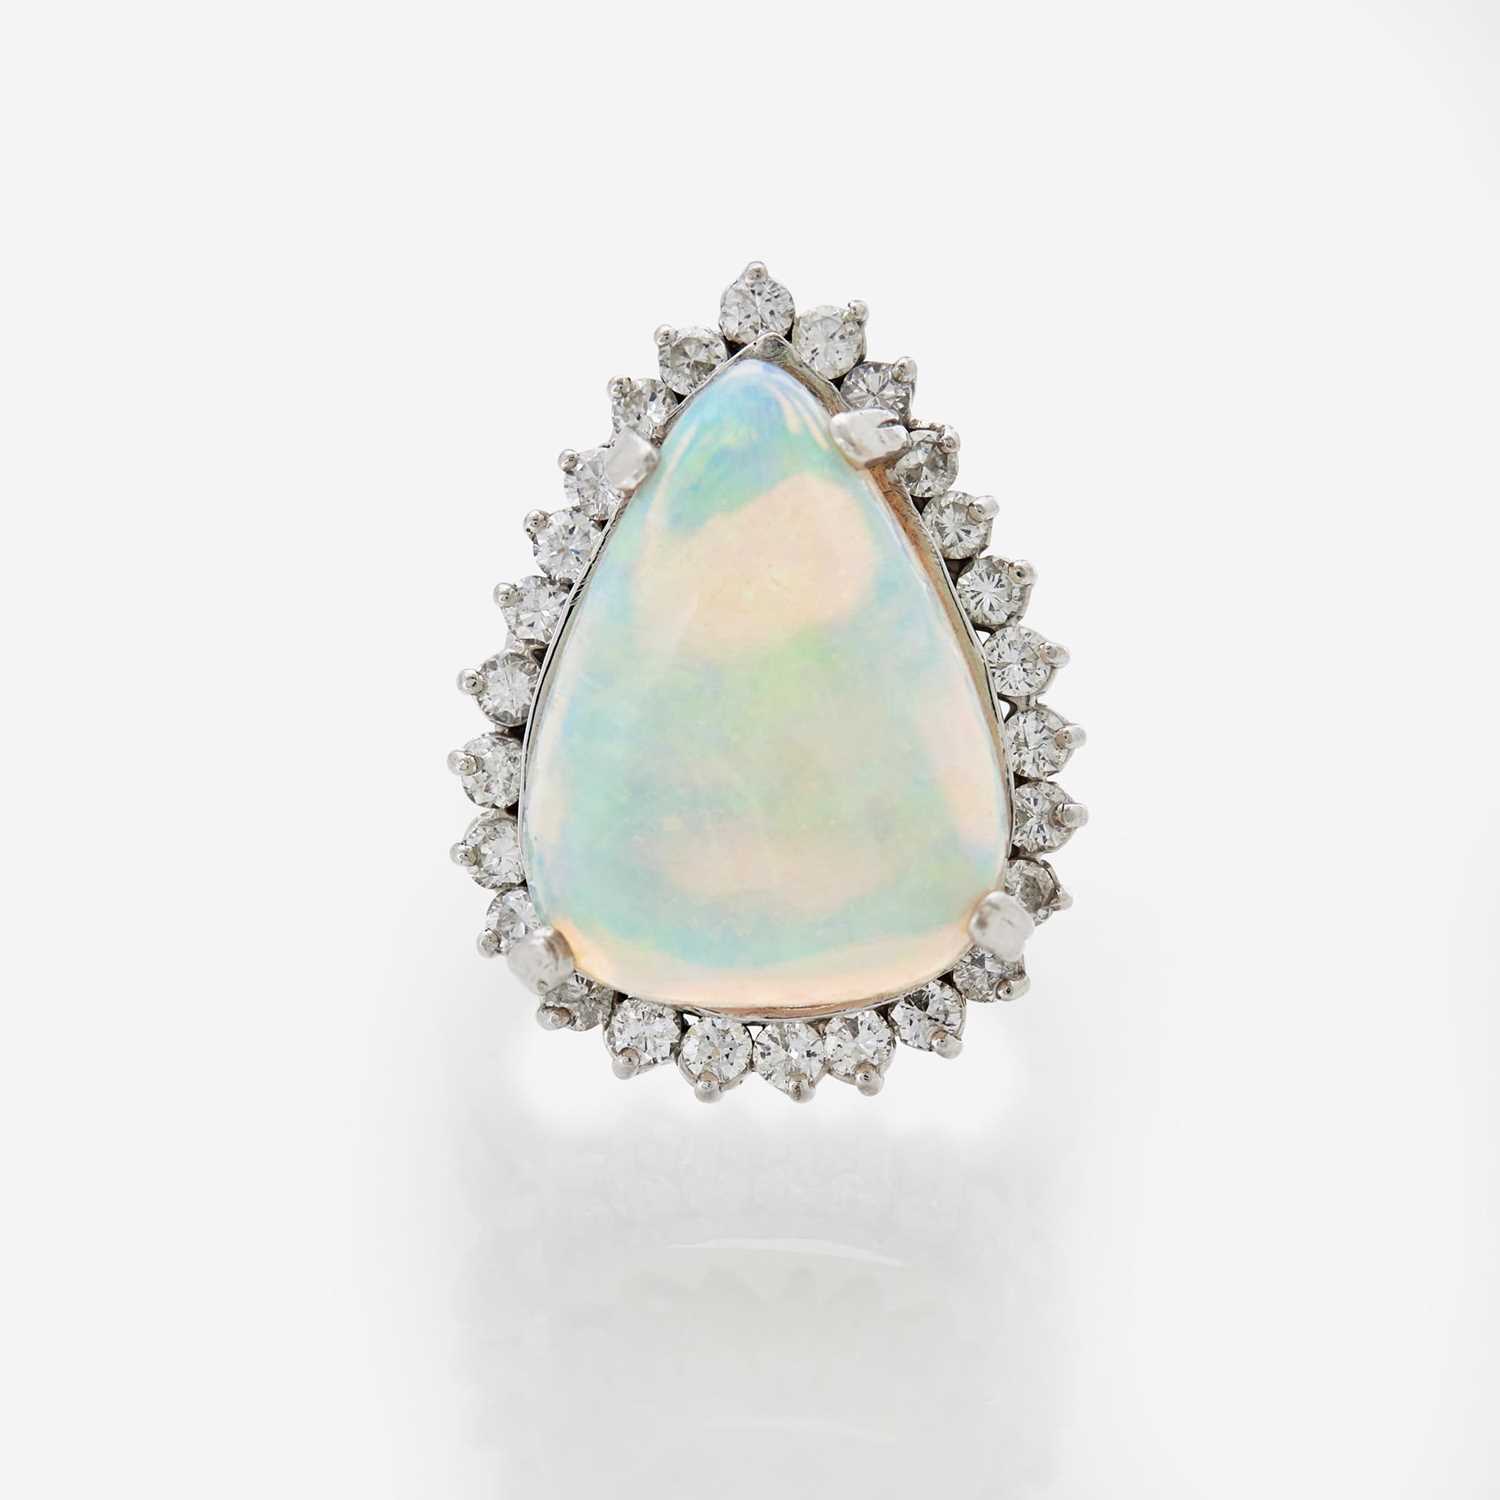 Lot 75 - A White Opal and Diamond Ring